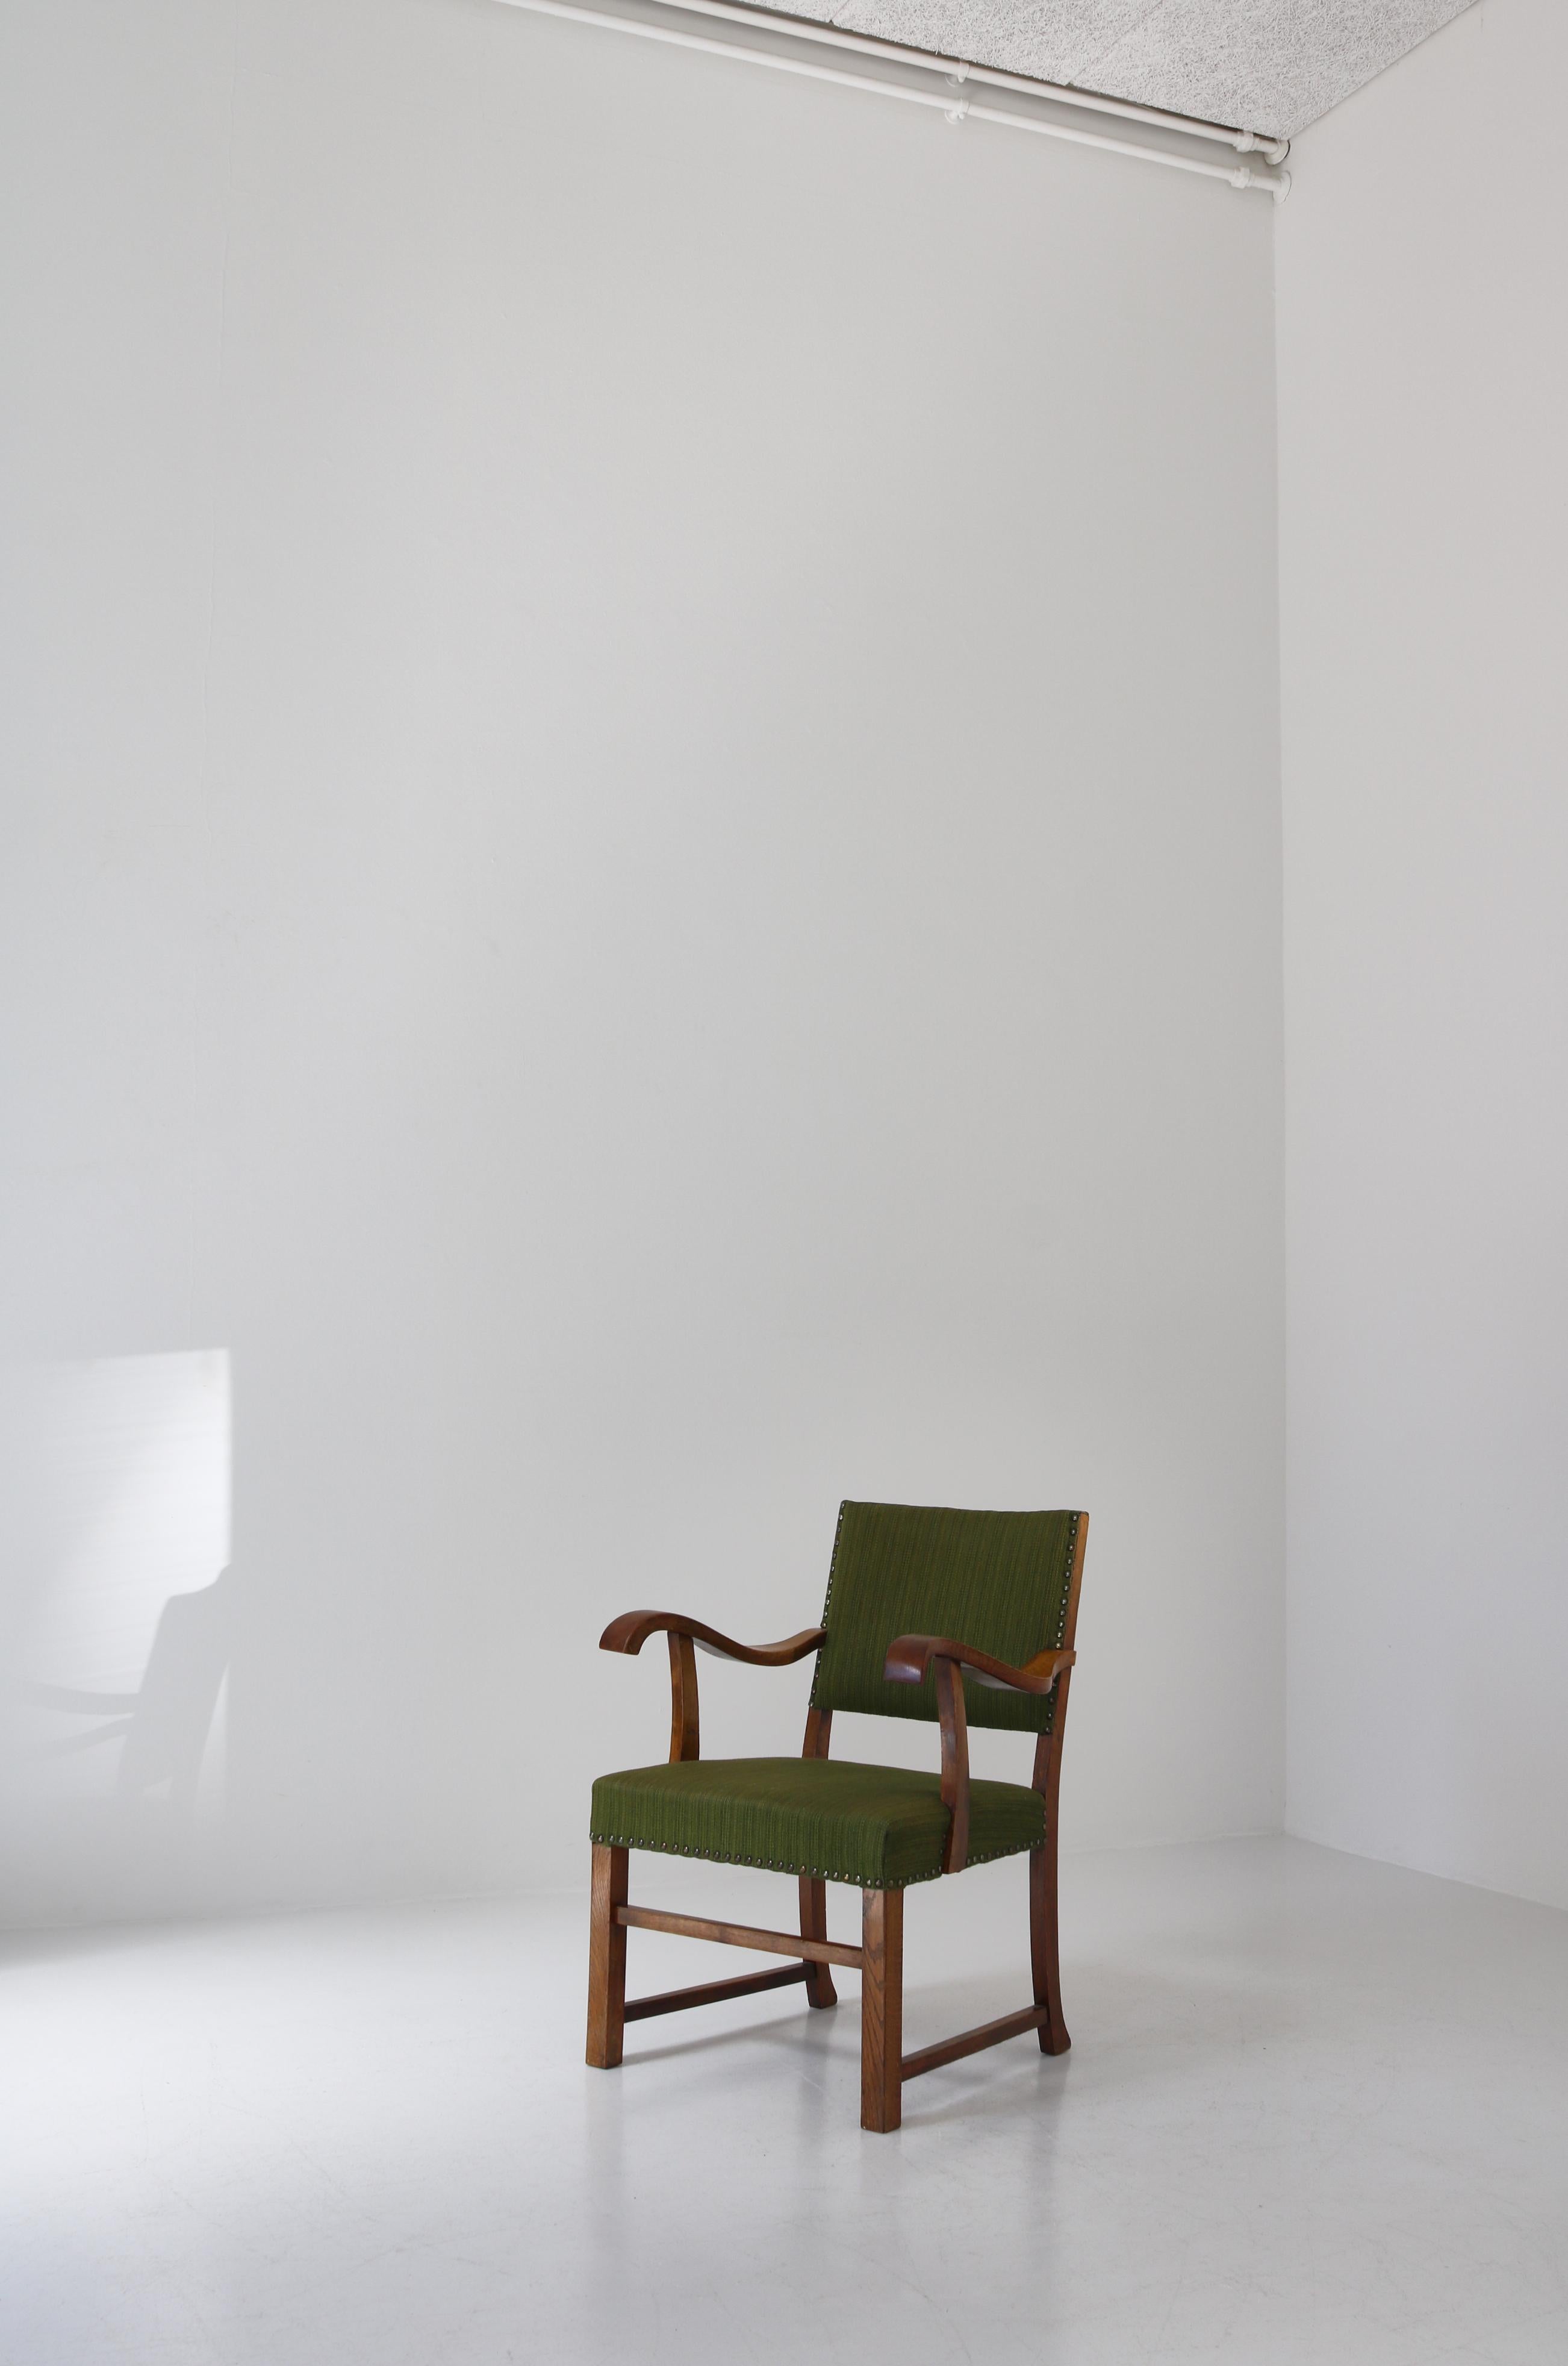 Early Danish Modern armchair with curved armrests made in the 1940s by cabinetmaker S. Thrane, Odense, Denmark. The design is clearly influenced by the functionalist movement introduced in Danish furniture design by Kaare Klint. The chair retains